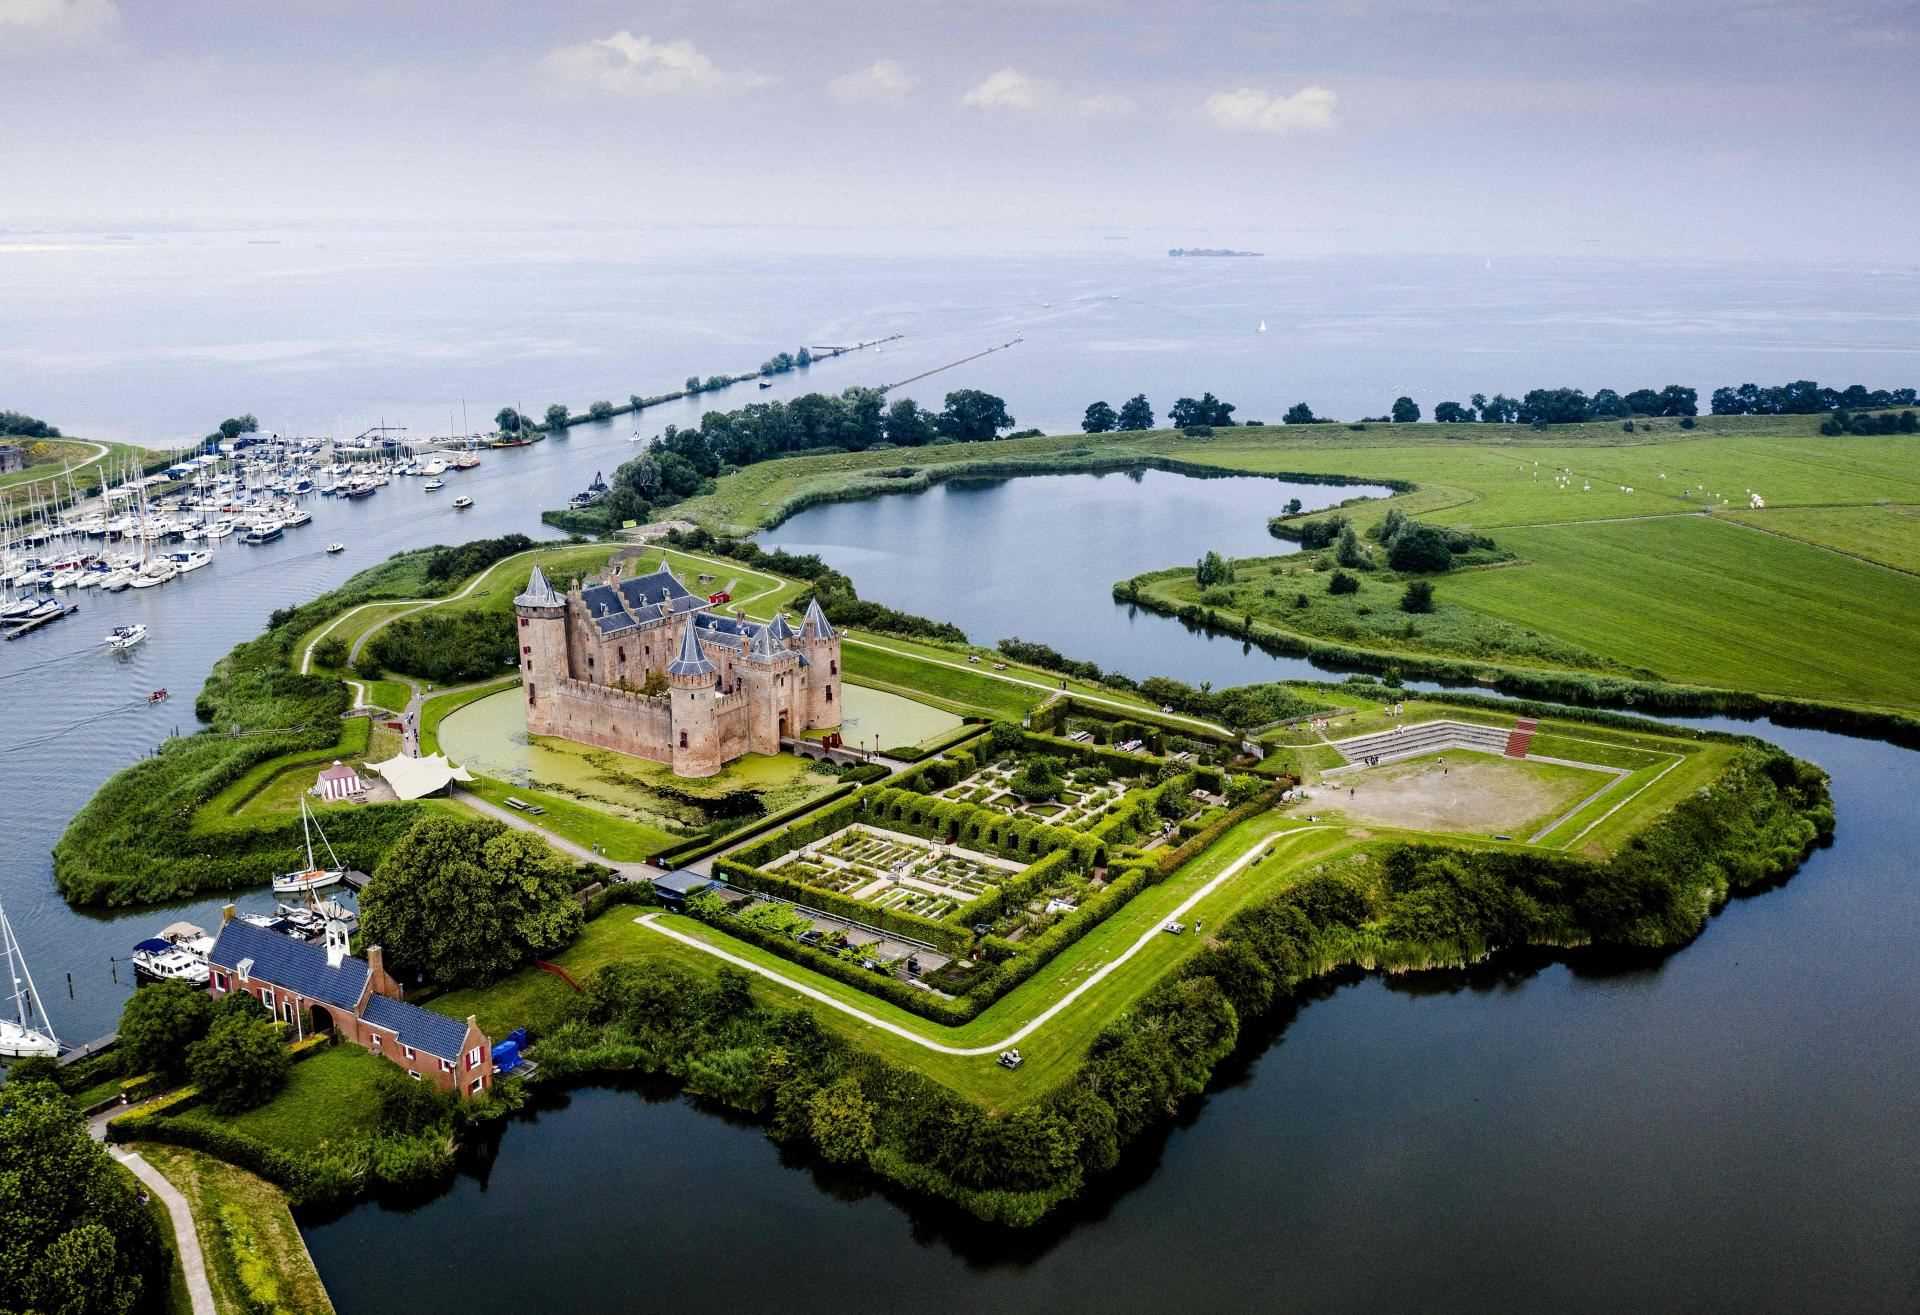 Muiderslot Castle (Netherlands) is part of the larger set of “Dutch Defense Water Lines”, now listed as World Heritage.